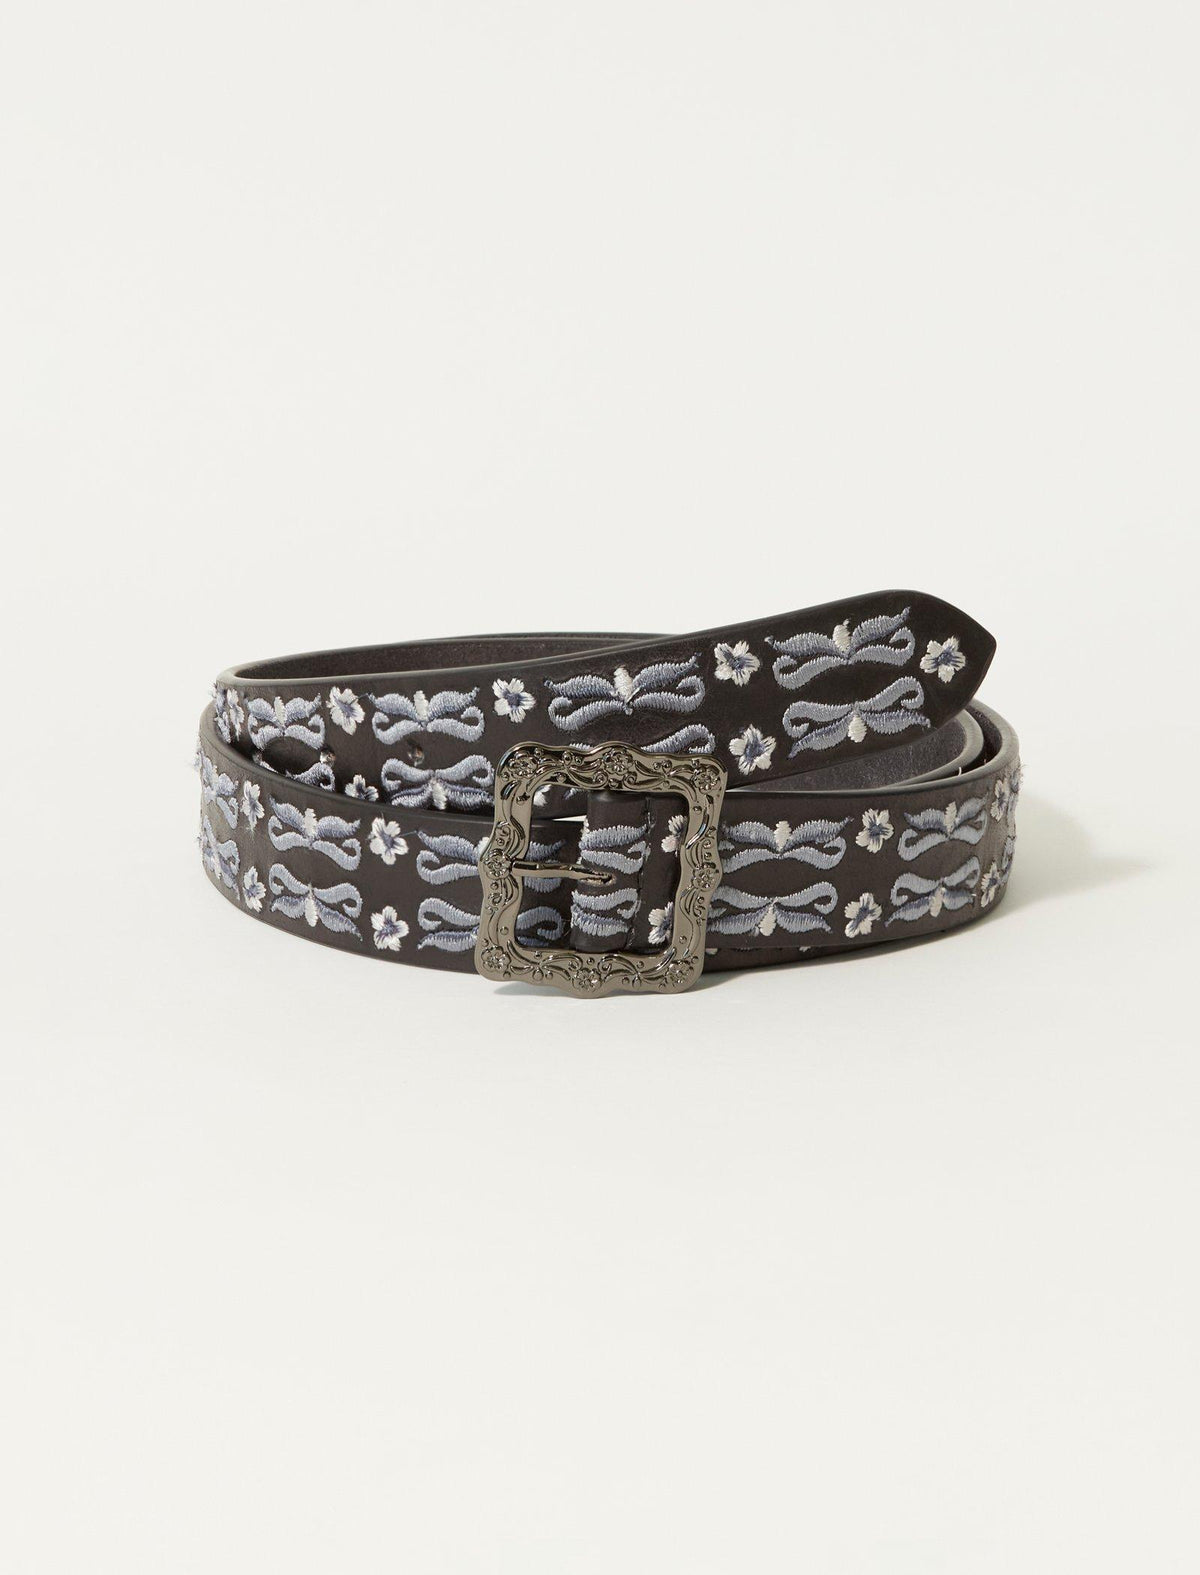 Lucky Brand Daisy And Ribbon Embroidered Belt - Women's Accessories Belts Black